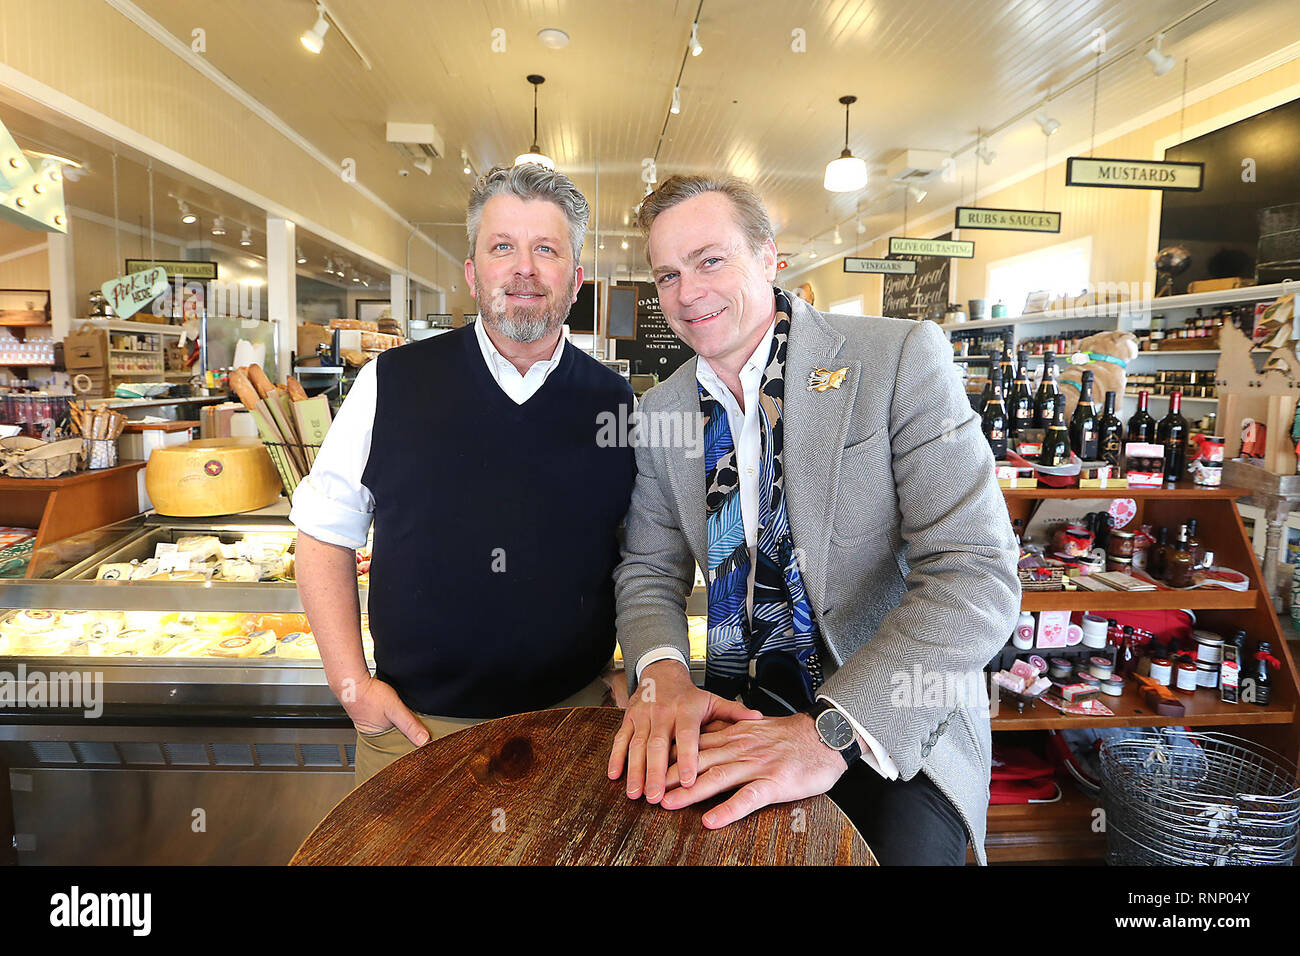 Oakville, CA, USA. 7th Feb, 2019. Jean-Charles Boisset, right, is seen with Oakville Grocery general manager Barry Dinsmore in the Oakville store that he recently purchased. Another store, located in Healdsburg, was also included in the sale. Credit: Napa Valley Register/ZUMA Wire/Alamy Live News Stock Photo